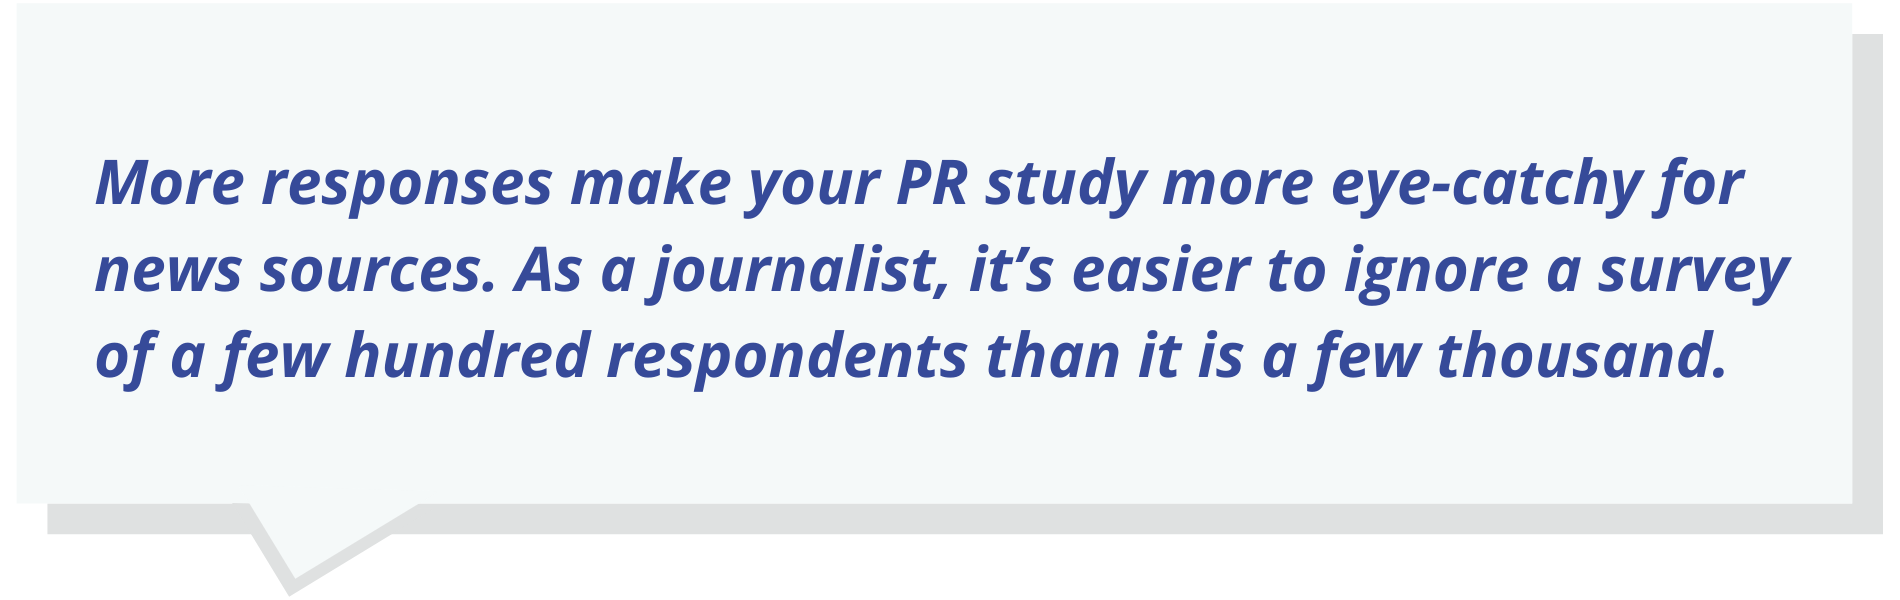 More responses make your PR study more eye-catchy for news sources. As a journalist, it’s easier to ignore a survey of a few hundred respondents than it is a few thousand.